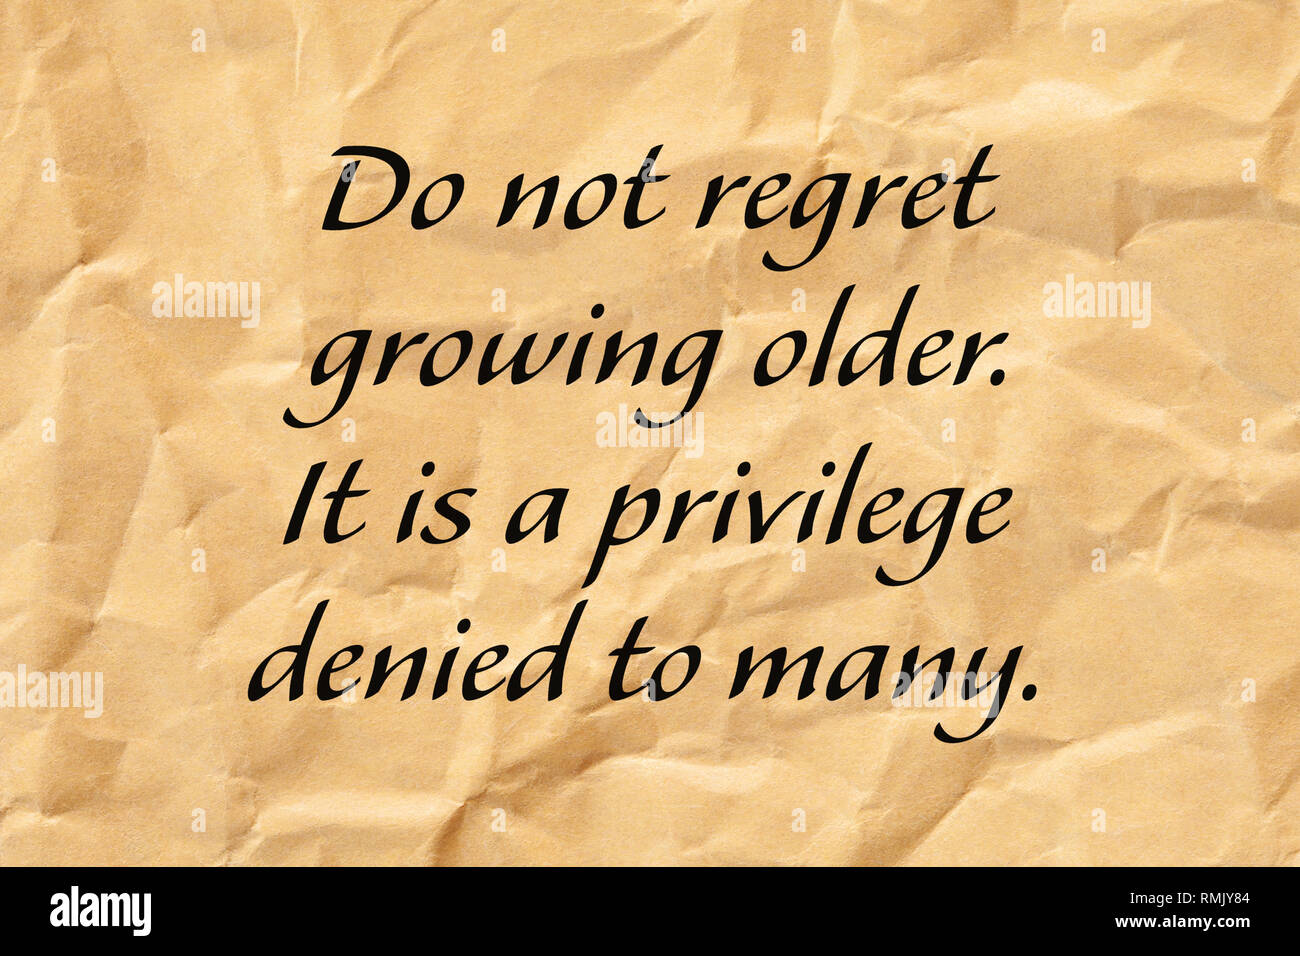 Do not regret growing older. It is a privilege denied to many. Positive aging quote written on crumpled brown paper. Stock Photo